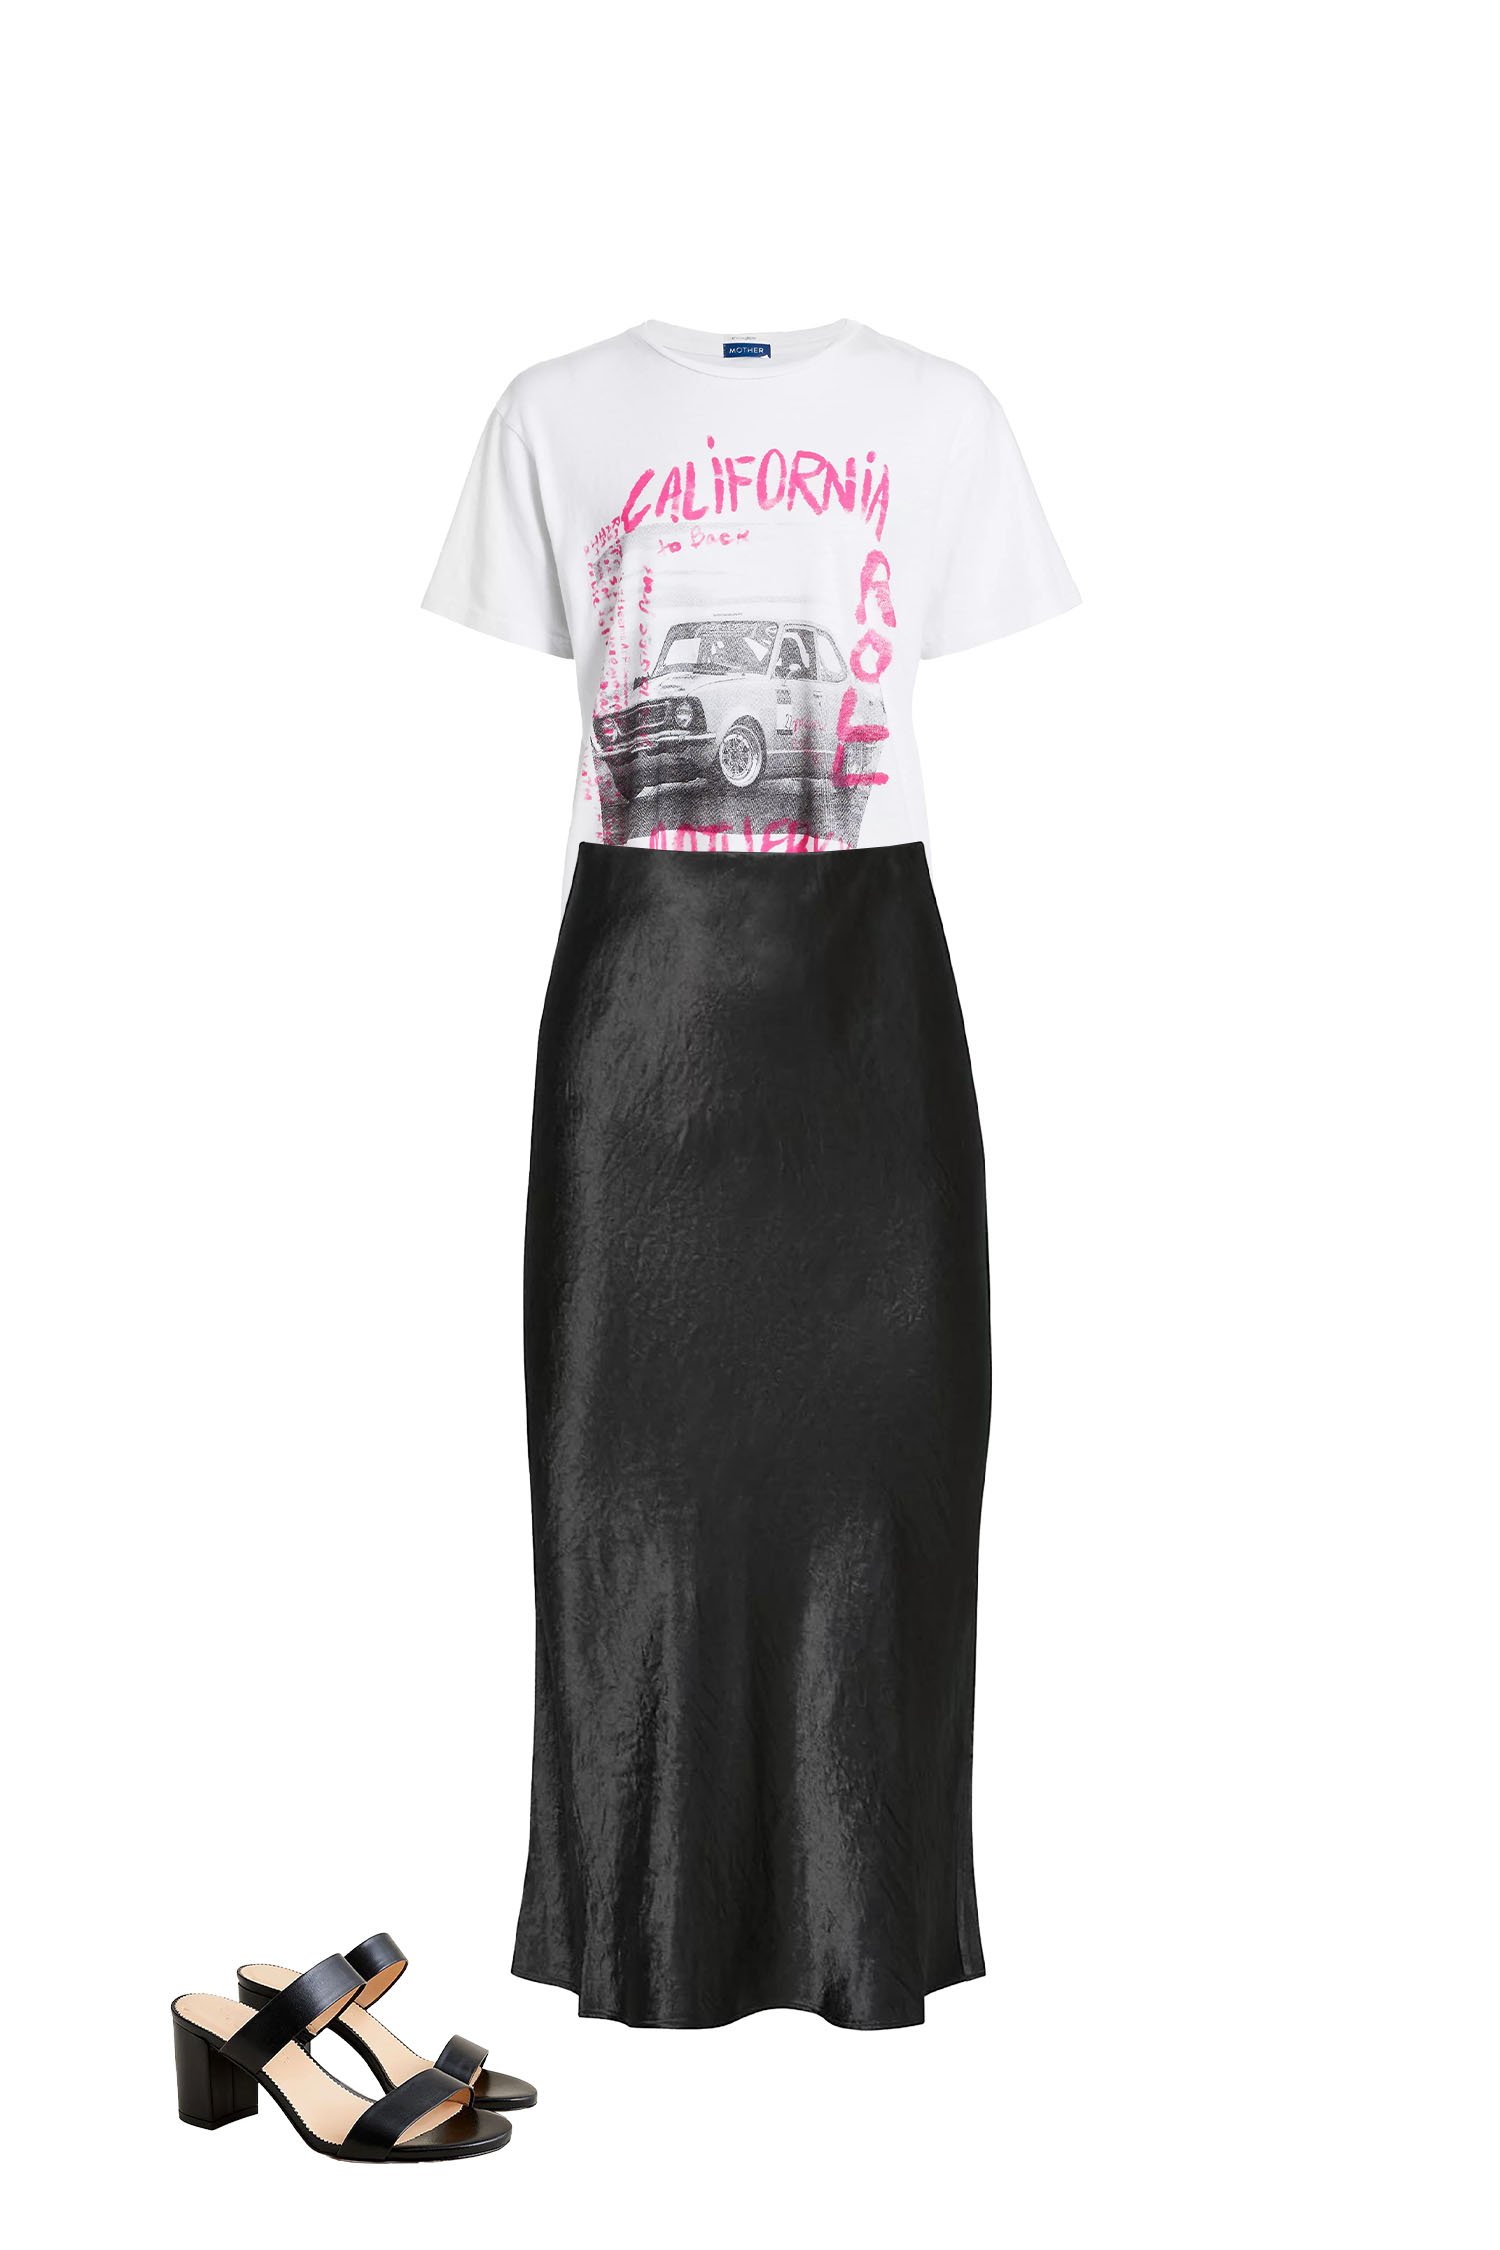 Black Satin Skirt Outfit with White Graphic T-shirt and Black Heeled Sandals